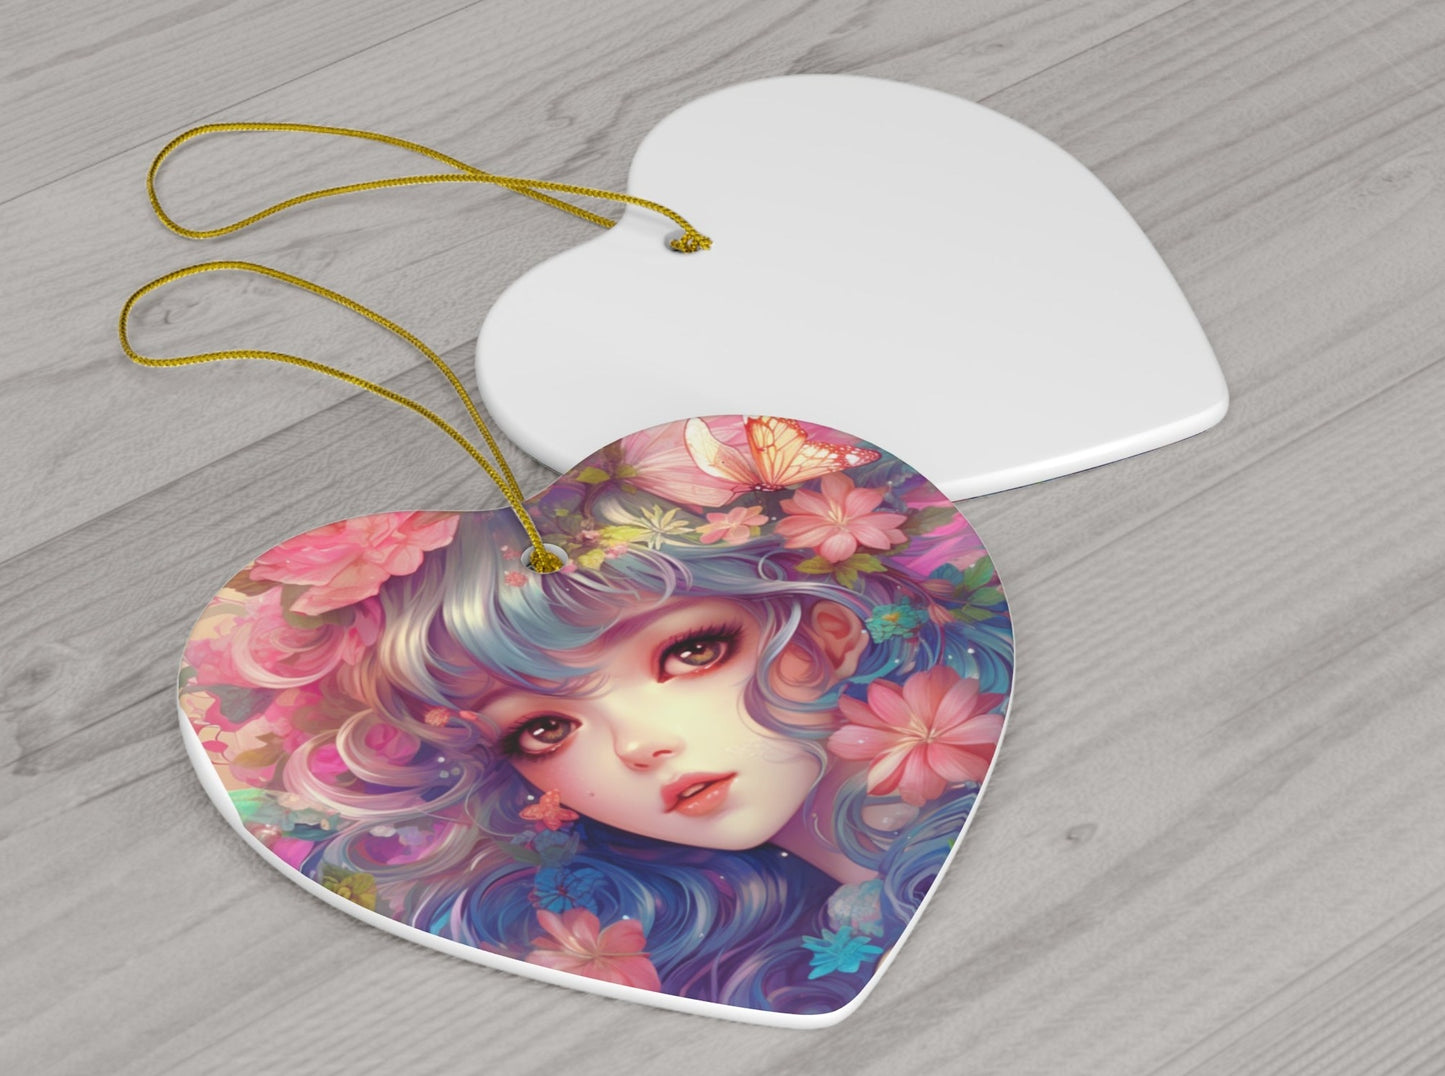 Angel Girl  | Christmas Tree Ornament | Ceramic Ornament | ( Available in 4 shapes - Snowflake, Star, Heart and Circle)